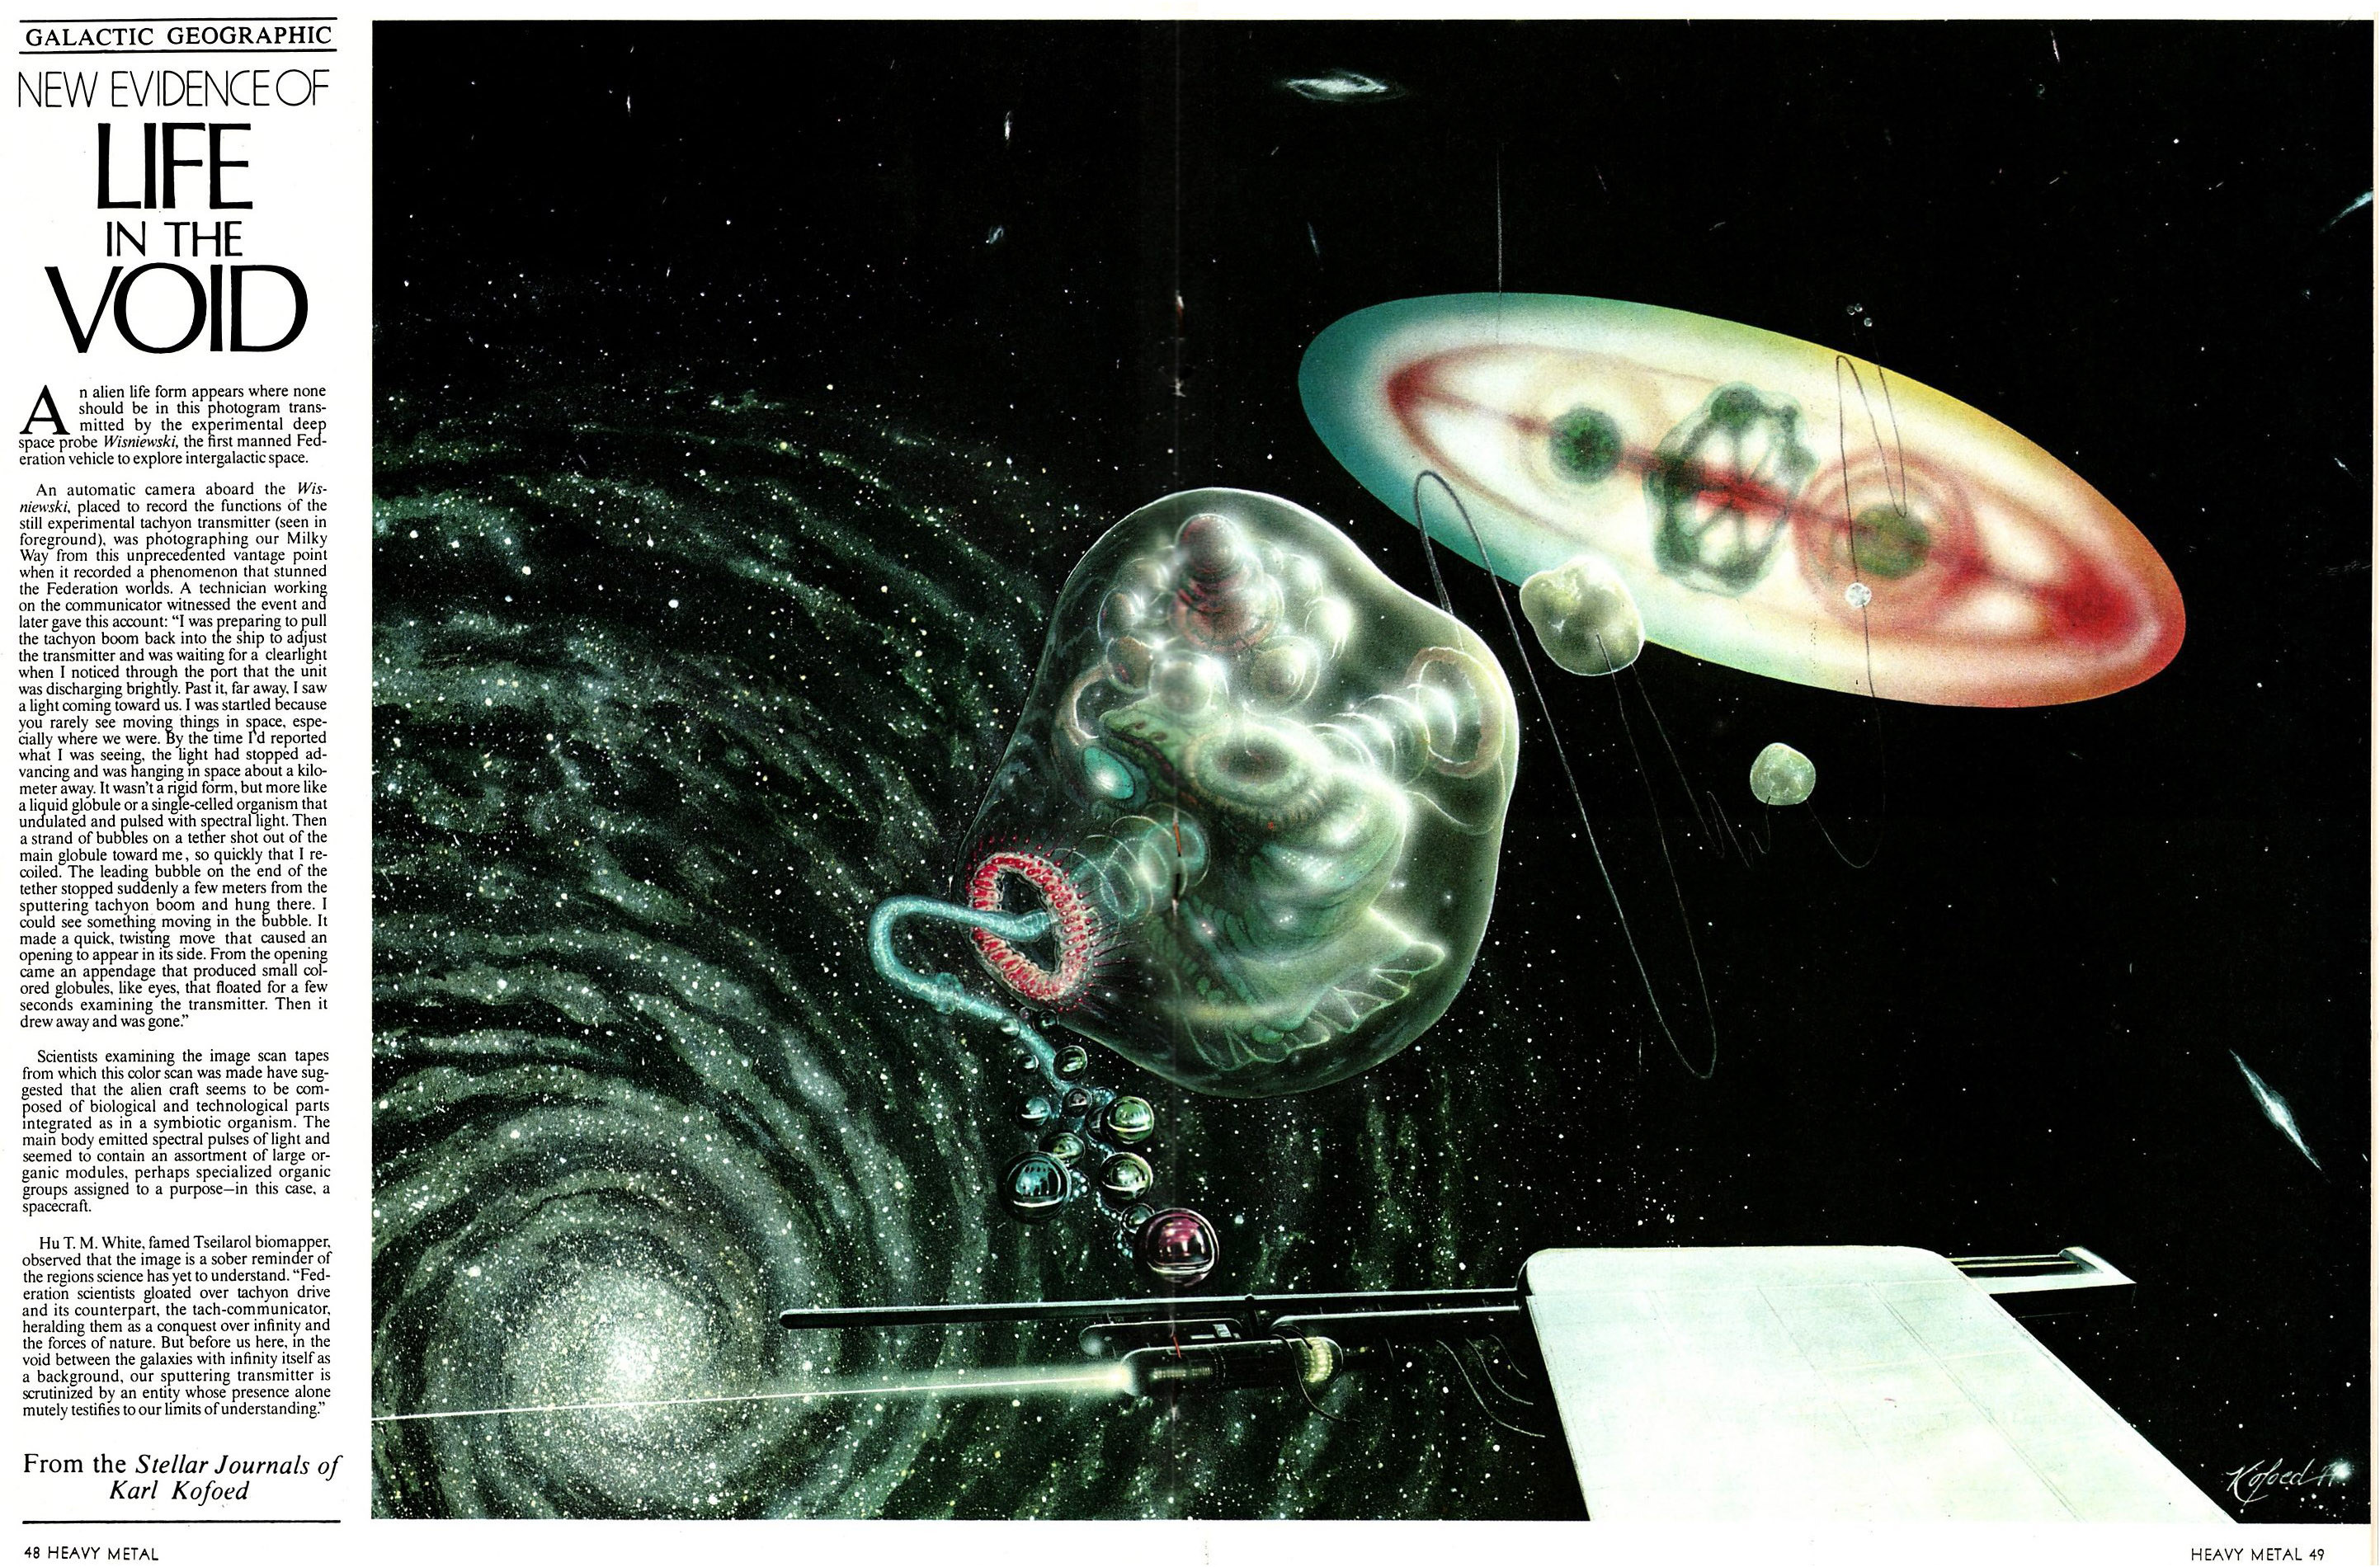 Galactic Geographic: New Evidence Of Life In The Void - Karl Kofoed (Heavy Metal. 1978. August – Volume 2 No. 4)